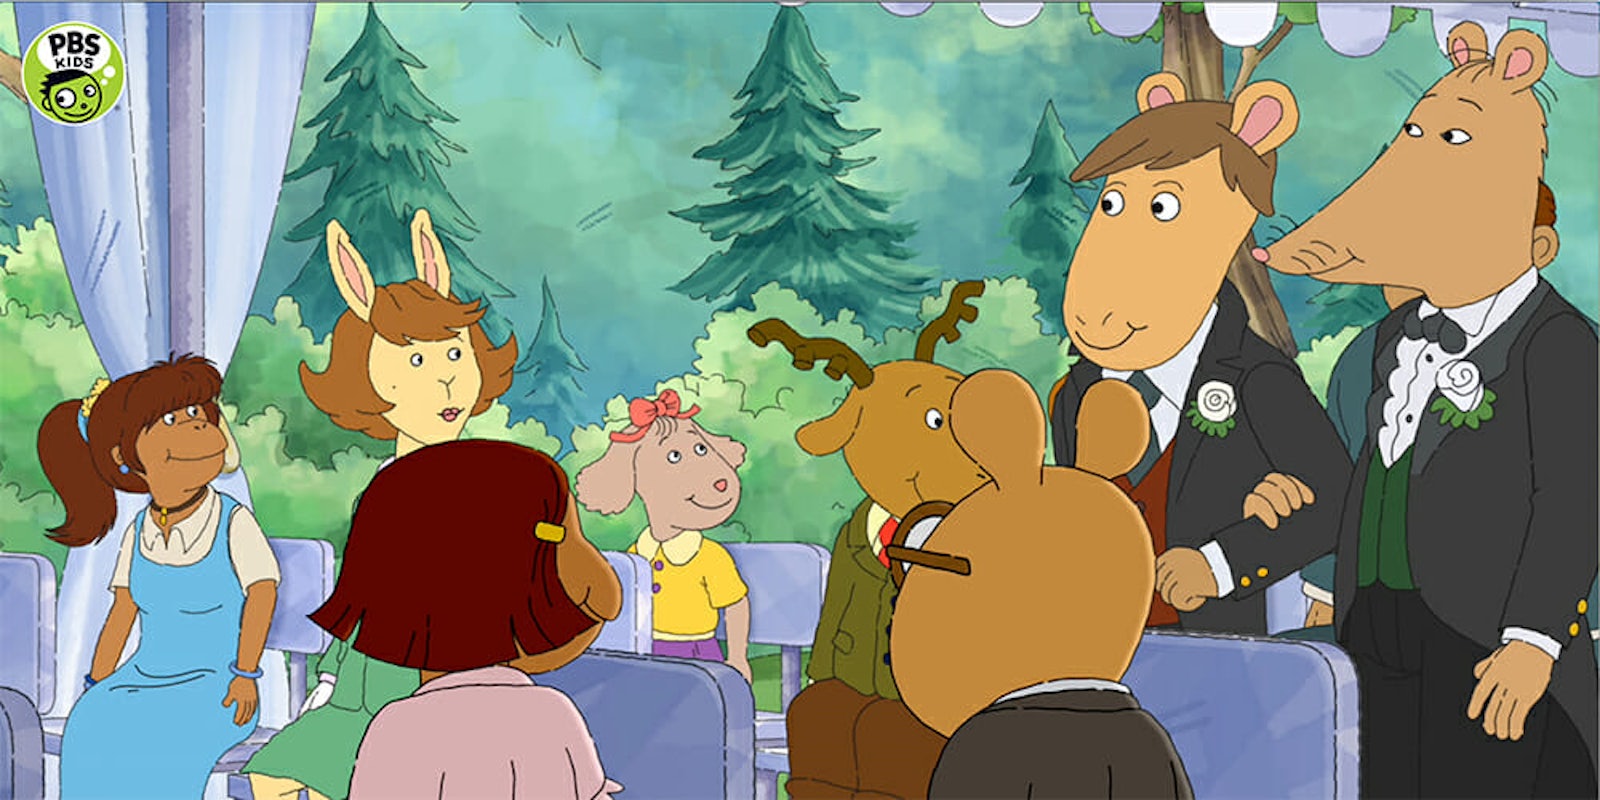 Mr. Ratburn from 'Arthur' came out as gay and married a man in the show's season 22 premiere.